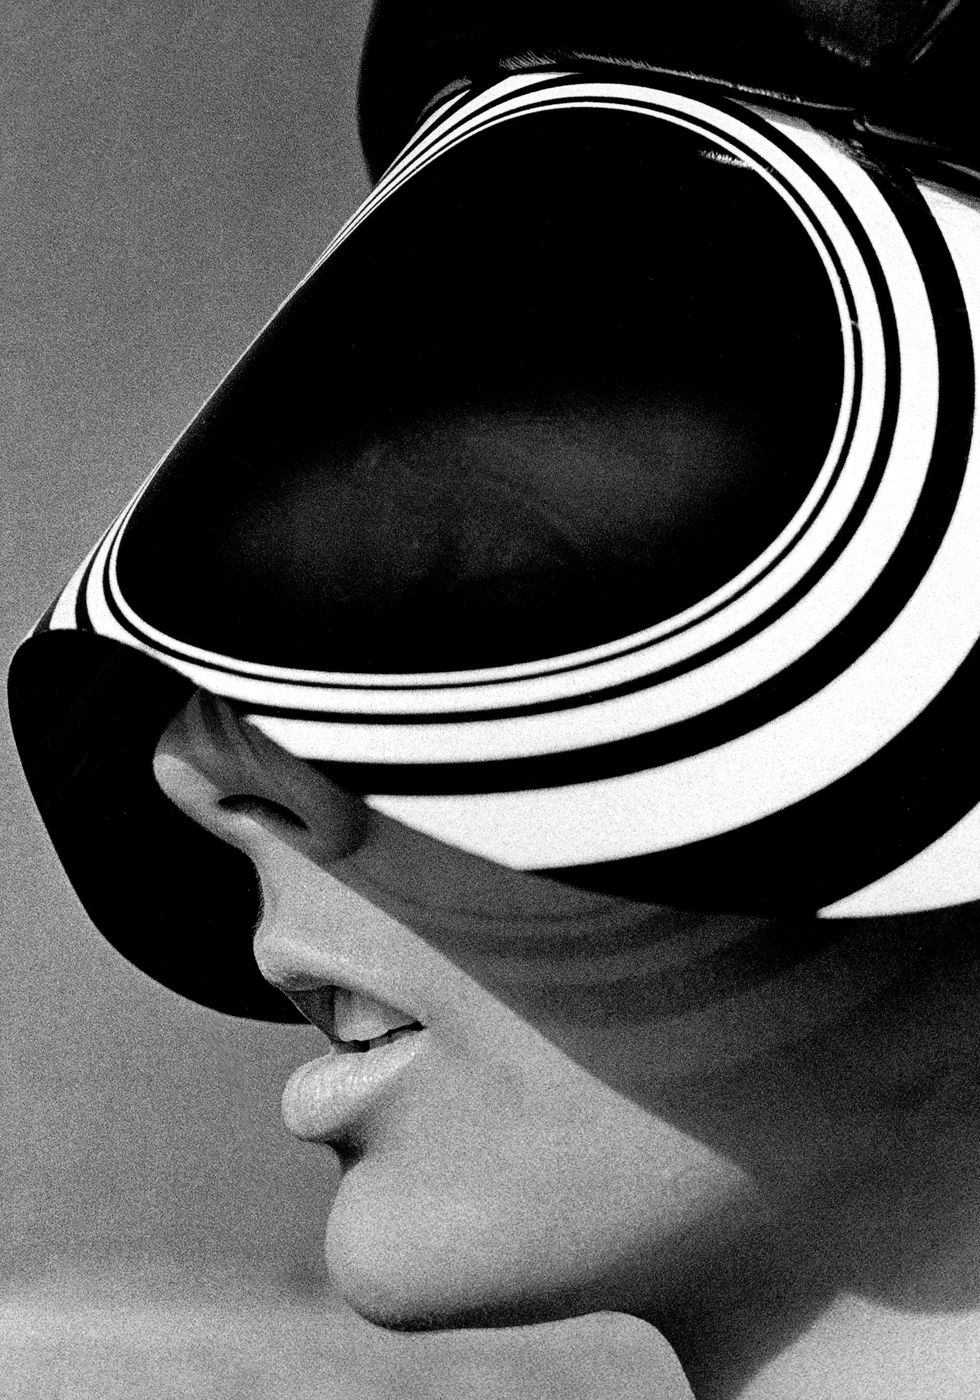 Tilly Tizzani with Acetate Visor, New York, 1966